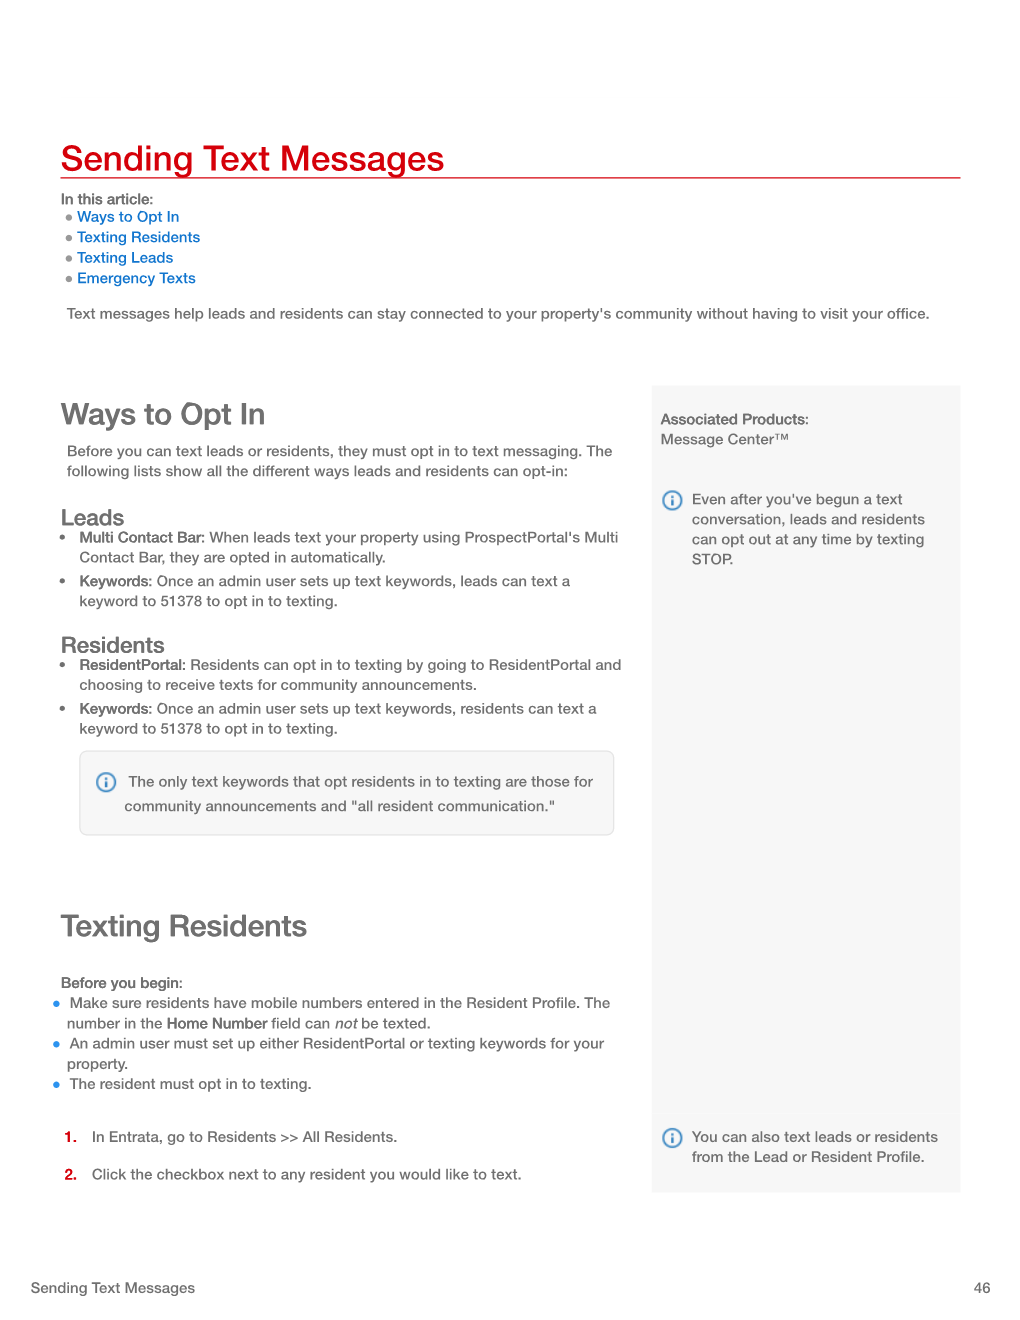 Setting up Text Messaging (Admin)